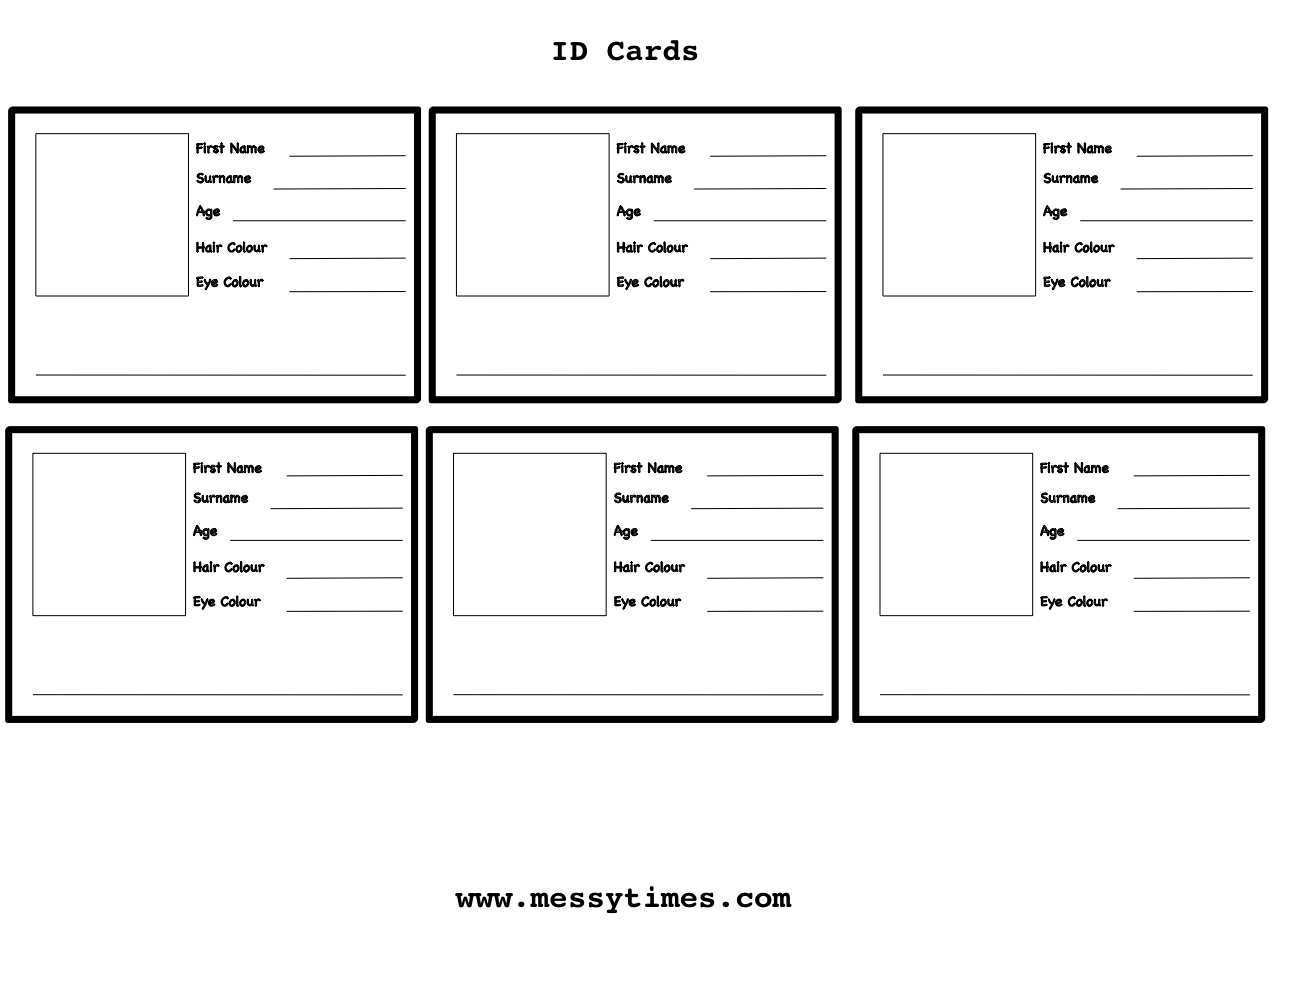 printable-child-id-card-template-free-best-free-template-for-you